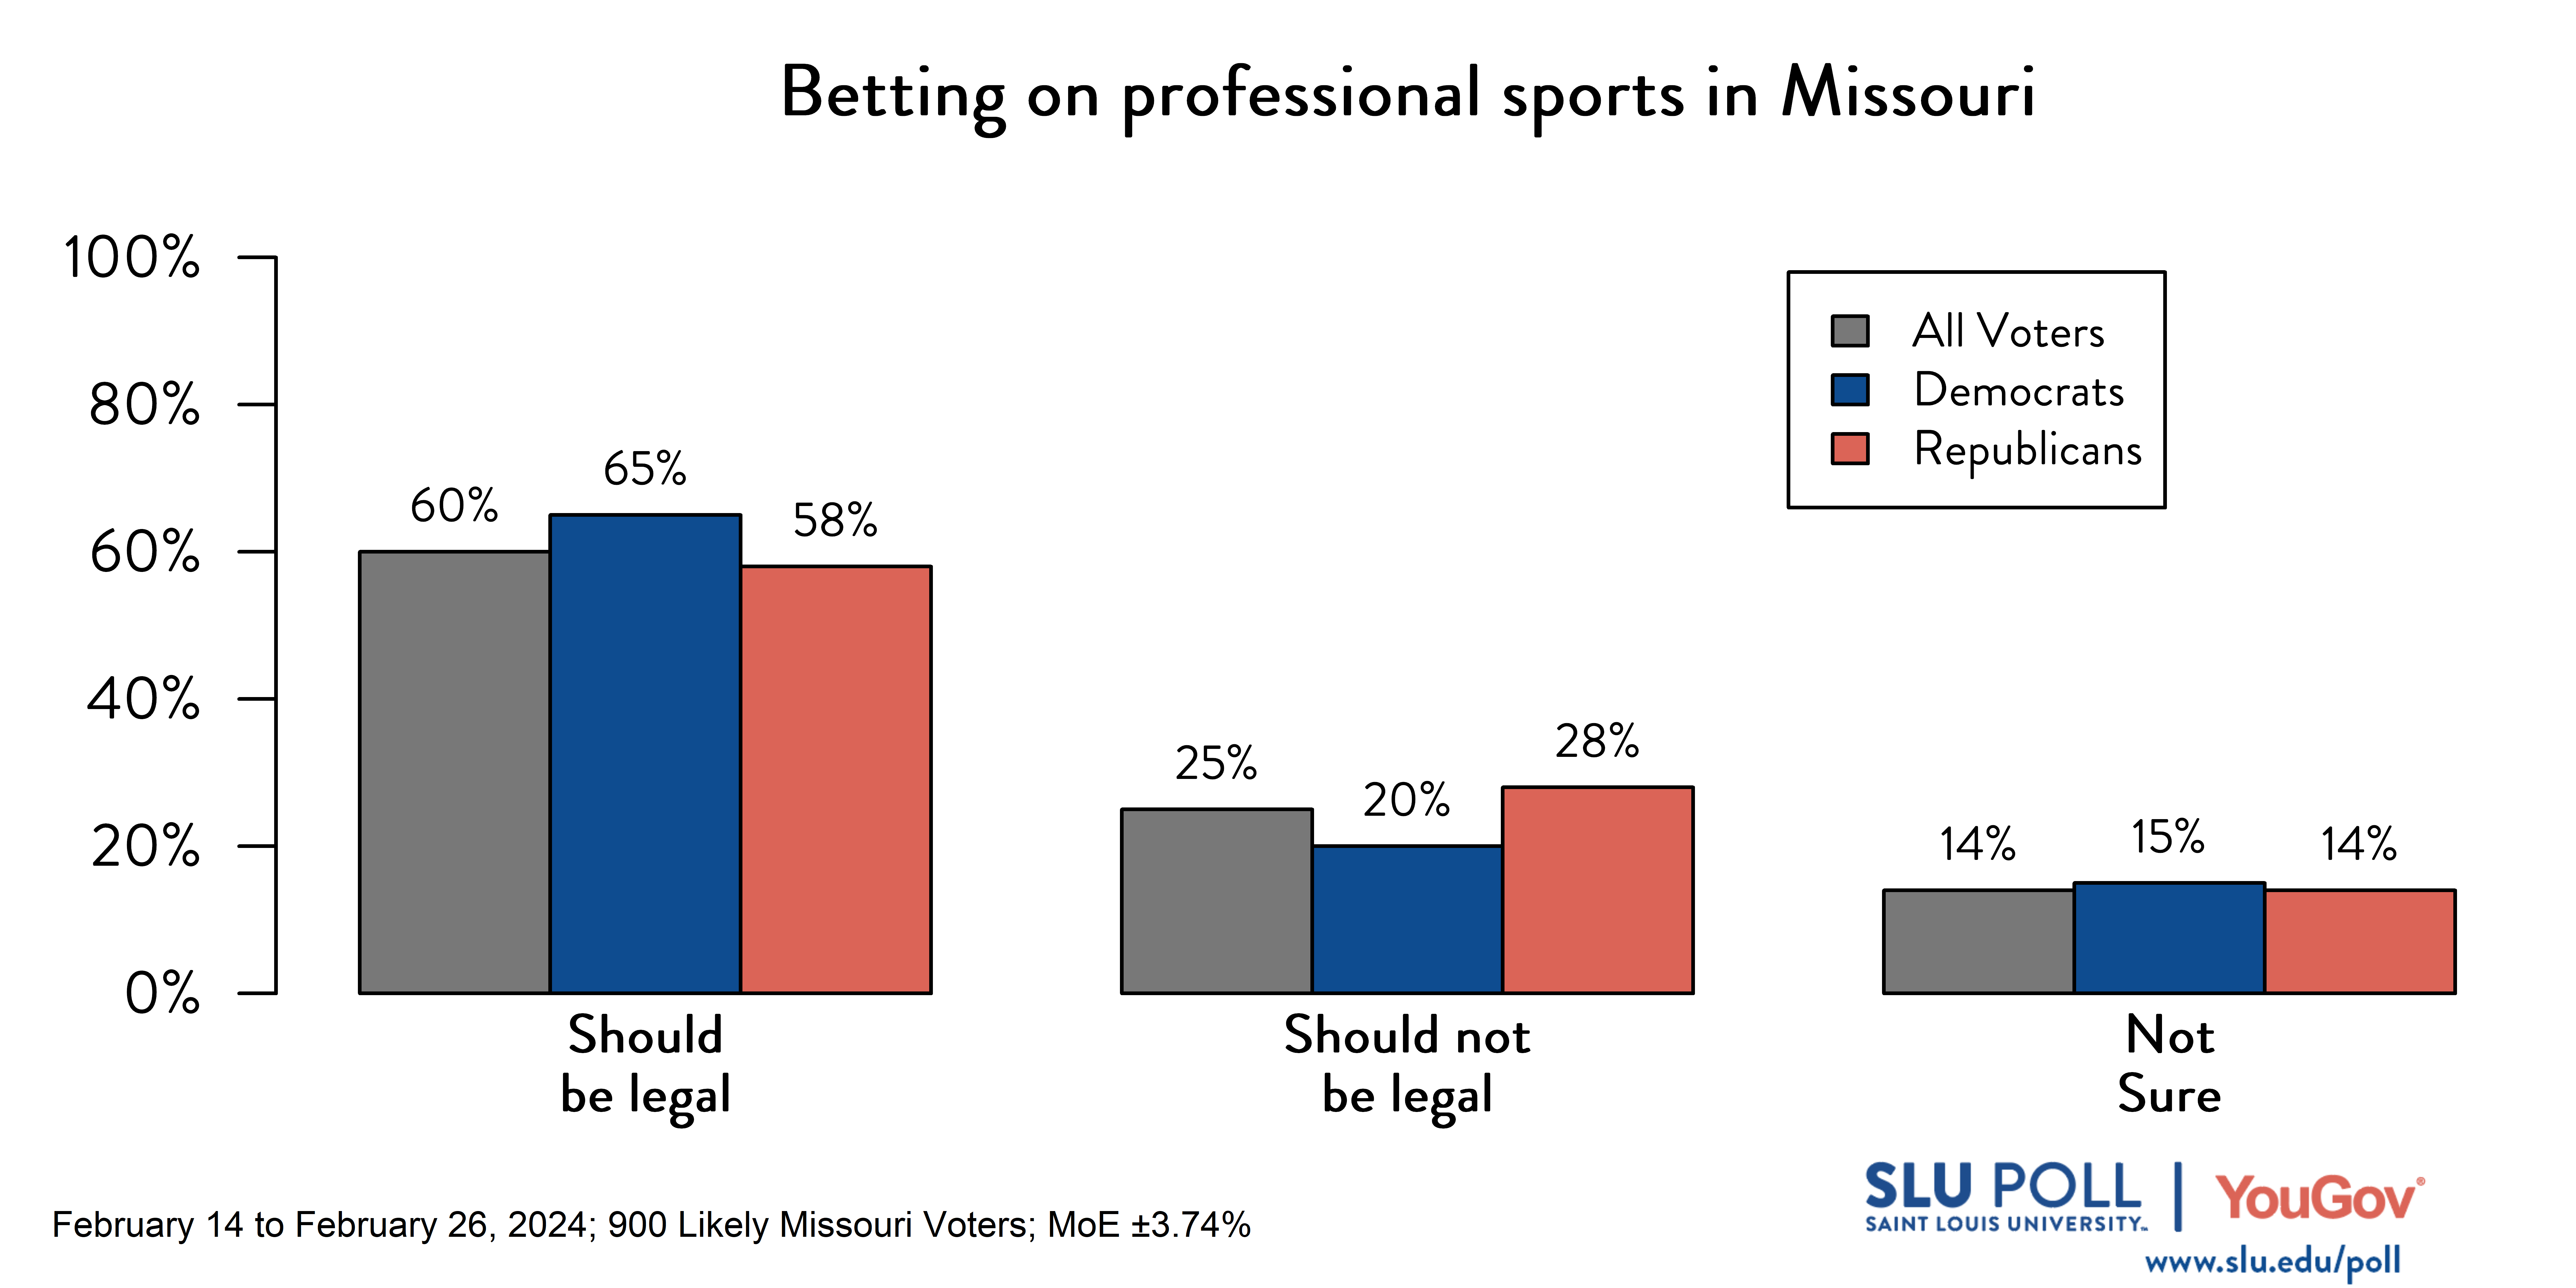 Likely voters' responses to 'Do you think the following should be legal in the state of Missouri for those who are 21 years old or older…Betting on professional sports?': 60% Should be legal, 25% Should not be legal, and 14% Not Sure. Democratic voters' responses: ' 65% Should be legal, 20% Should not be legal, and 15% Not Sure. Republican voters' responses:  58% Should be legal, 28% Should not be legal, and 14% Not Sure.